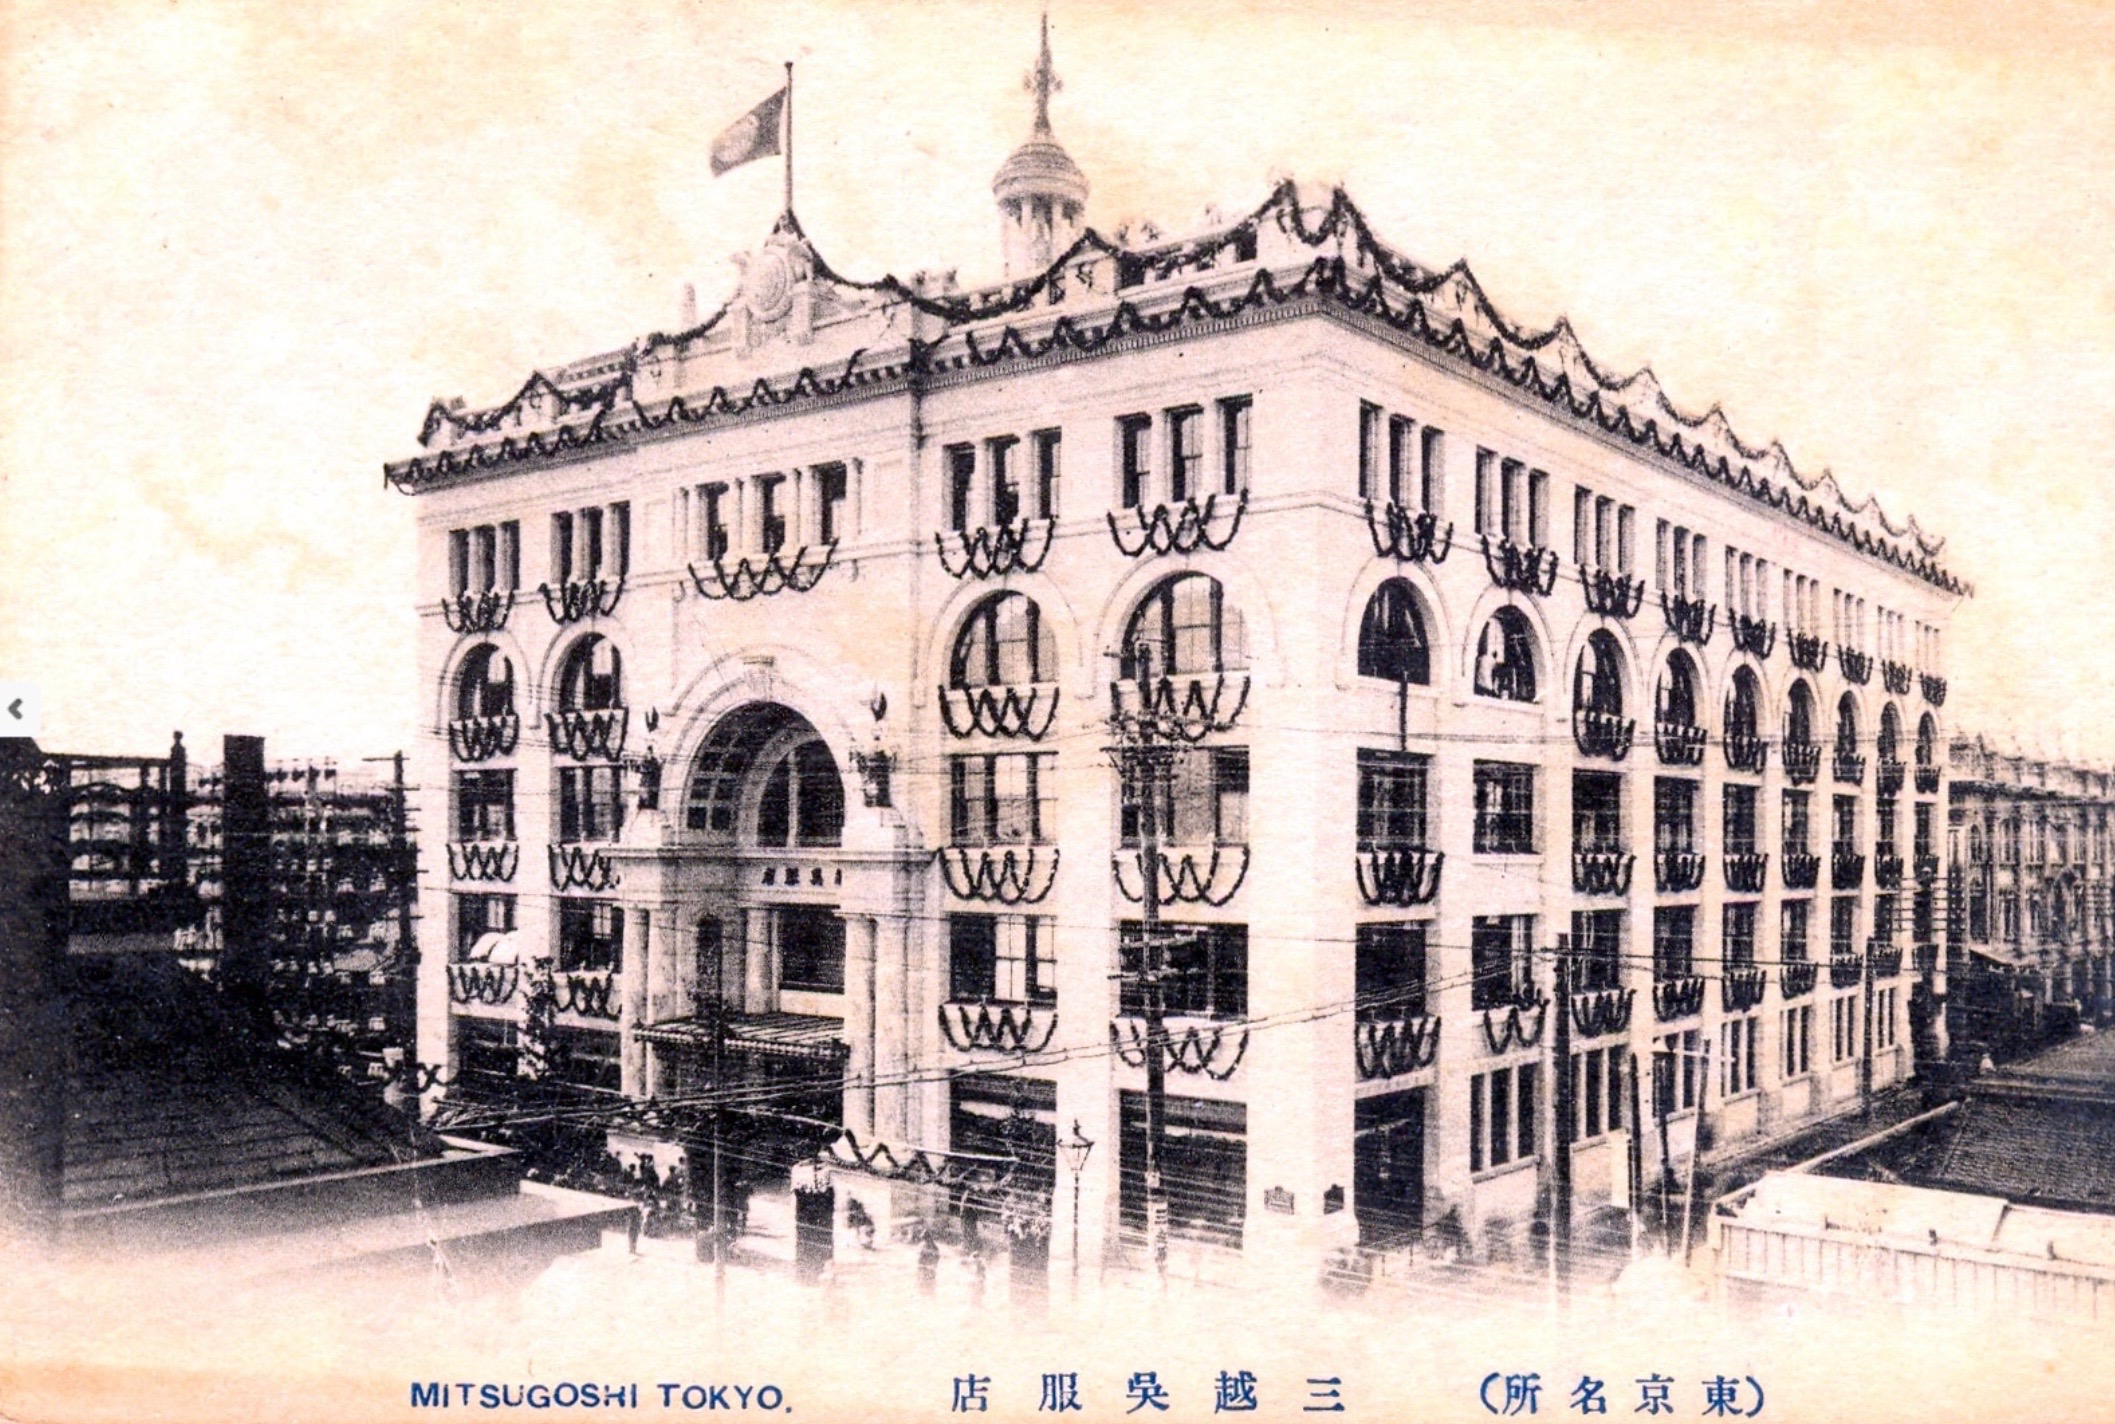 03_Mitsukoshi decked out for its grande re-opening (ca. 1914)